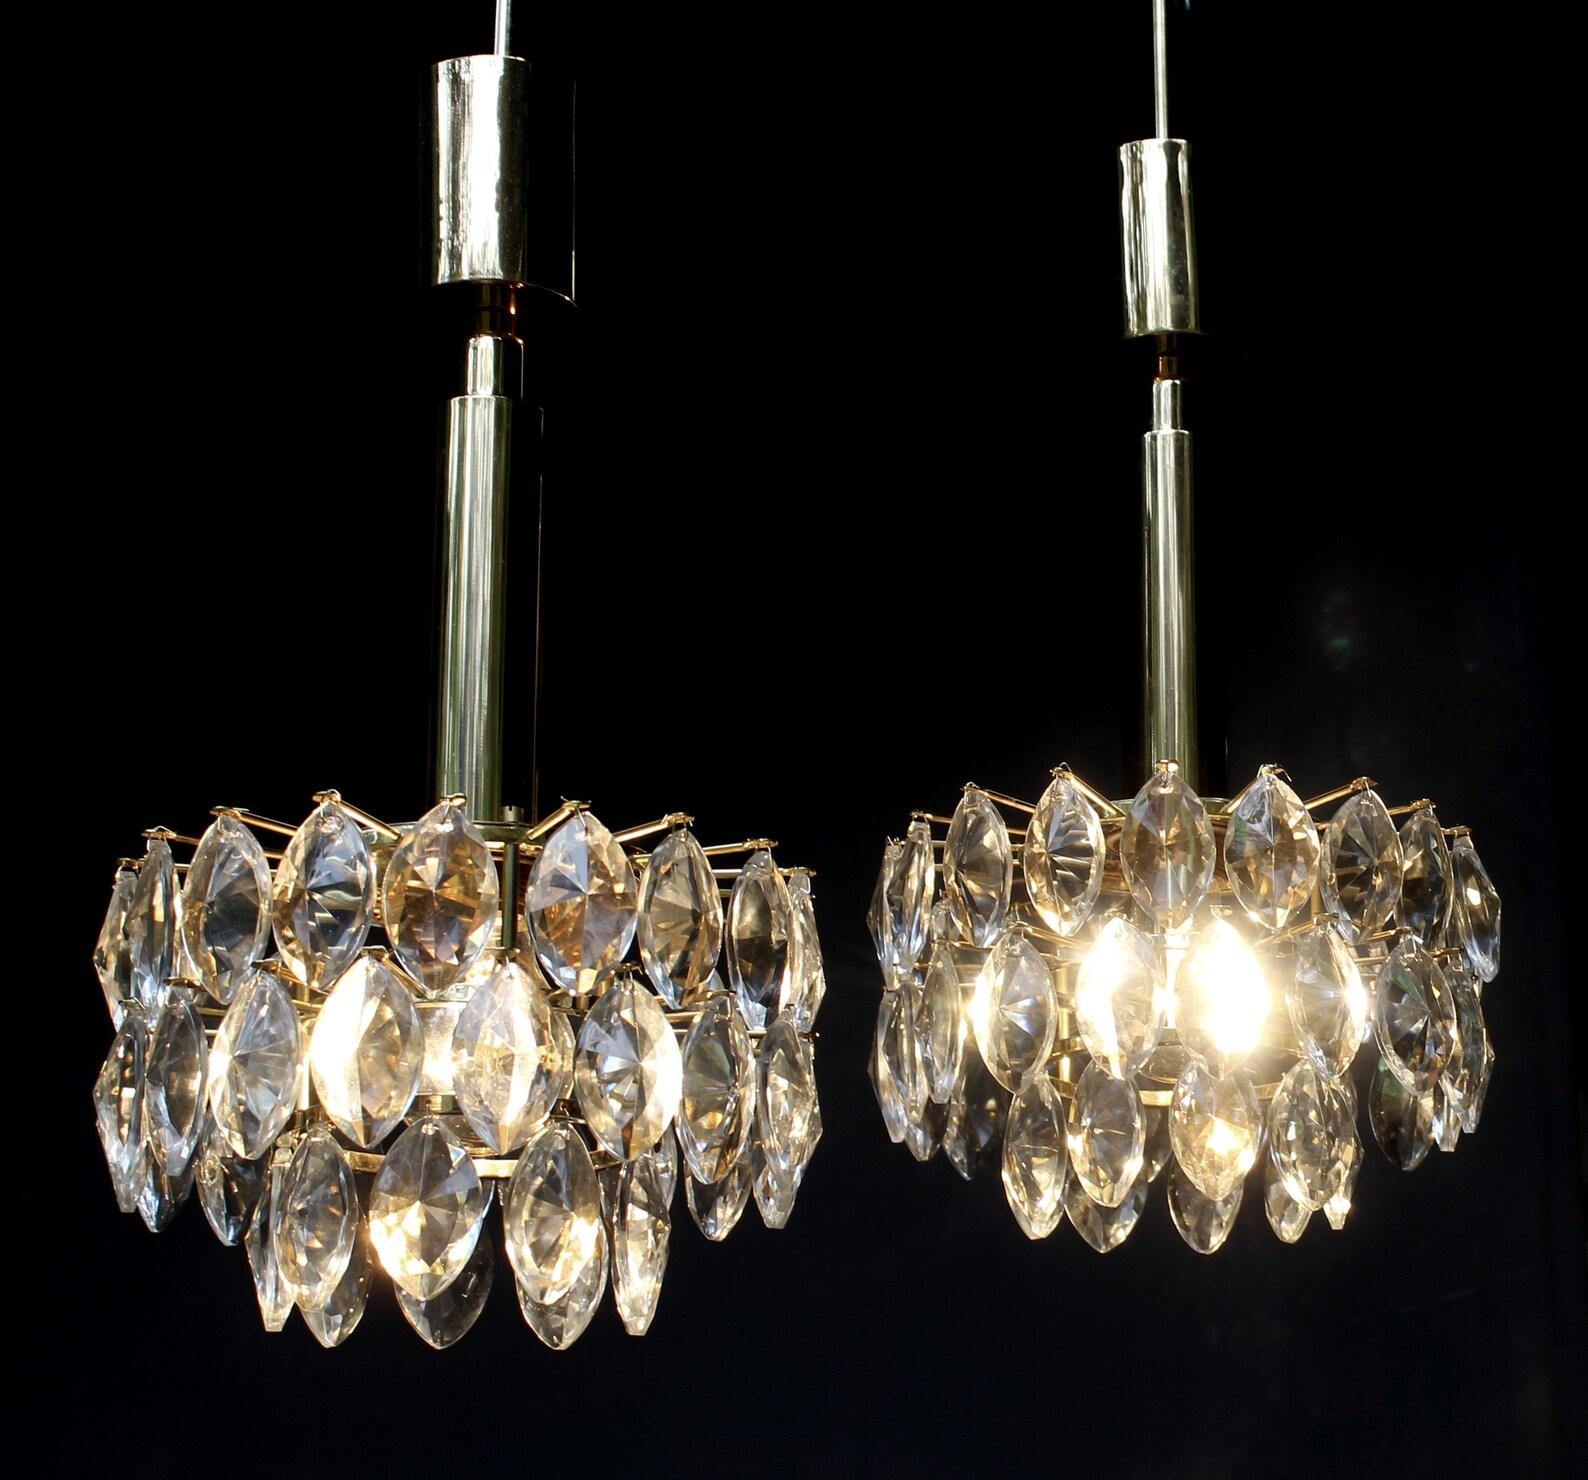 Metal Hollywood Regency Gilt Pair of Schroeder & Co. Chandeliers, Germany, 1970s For Sale